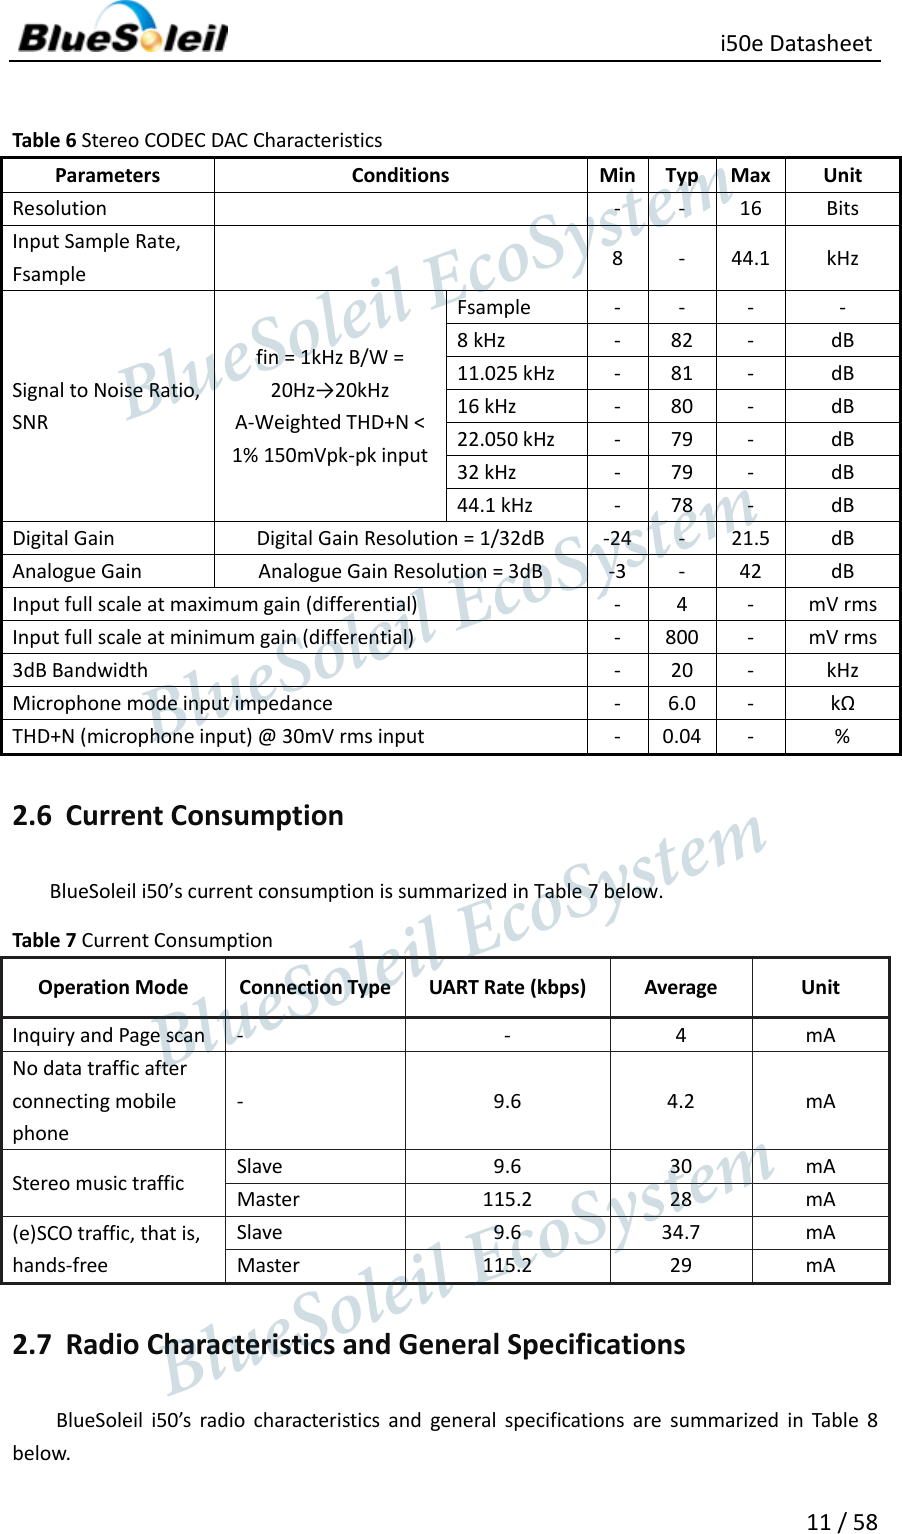                                                   i50e Datasheet 11 / 58  Table 6 Stereo CODEC DAC Characteristics Parameters Conditions Min Typ Max Unit Resolution      - - 16 Bits Input Sample Rate, Fsample  8 - 44.1 kHz Signal to Noise Ratio, SNR   fin = 1kHz B/W = 20Hz→20kHz A-Weighted THD+N &lt; 1% 150mVpk-pk input   Fsample - - - - 8 kHz   - 82 - dB 11.025 kHz   - 81 - dB 16 kHz   - 80 - dB 22.050 kHz   - 79 - dB 32 kHz   - 79 - dB 44.1 kHz   - 78 - dB Digital Gain   Digital Gain Resolution = 1/32dB   -24 - 21.5 dB Analogue Gain   Analogue Gain Resolution = 3dB   -3 - 42 dB Input full scale at maximum gain (differential)   - 4 - mV rms Input full scale at minimum gain (differential)   - 800 - mV rms 3dB Bandwidth   - 20 - kHz Microphone mode input impedance   - 6.0 - kΩ THD+N (microphone input) @ 30mV rms input   - 0.04 - % 2.6 Current Consumption BlueSoleil i50’s current consumption is summarized in Table 7 below. Table 7 Current Consumption   Operation Mode Connection Type UART Rate (kbps) Average Unit Inquiry and Page scan   - - 4 mA No data traffic after connecting mobile phone - 9.6 4.2 mA Stereo music traffic   Slave 9.6 30 mA Master 115.2 28 mA (e)SCO traffic, that is, hands-free Slave   9.6 34.7 mA Master 115.2 29 mA 2.7 Radio Characteristics and General Specifications BlueSoleil  i50’s  radio  characteristics  and  general  specifications  are  summarized  in  Table  8 below.                  BlueSoleil EcoSystem            BlueSoleil EcoSystem      BlueSoleil EcoSystemBlueSoleil EcoSystem